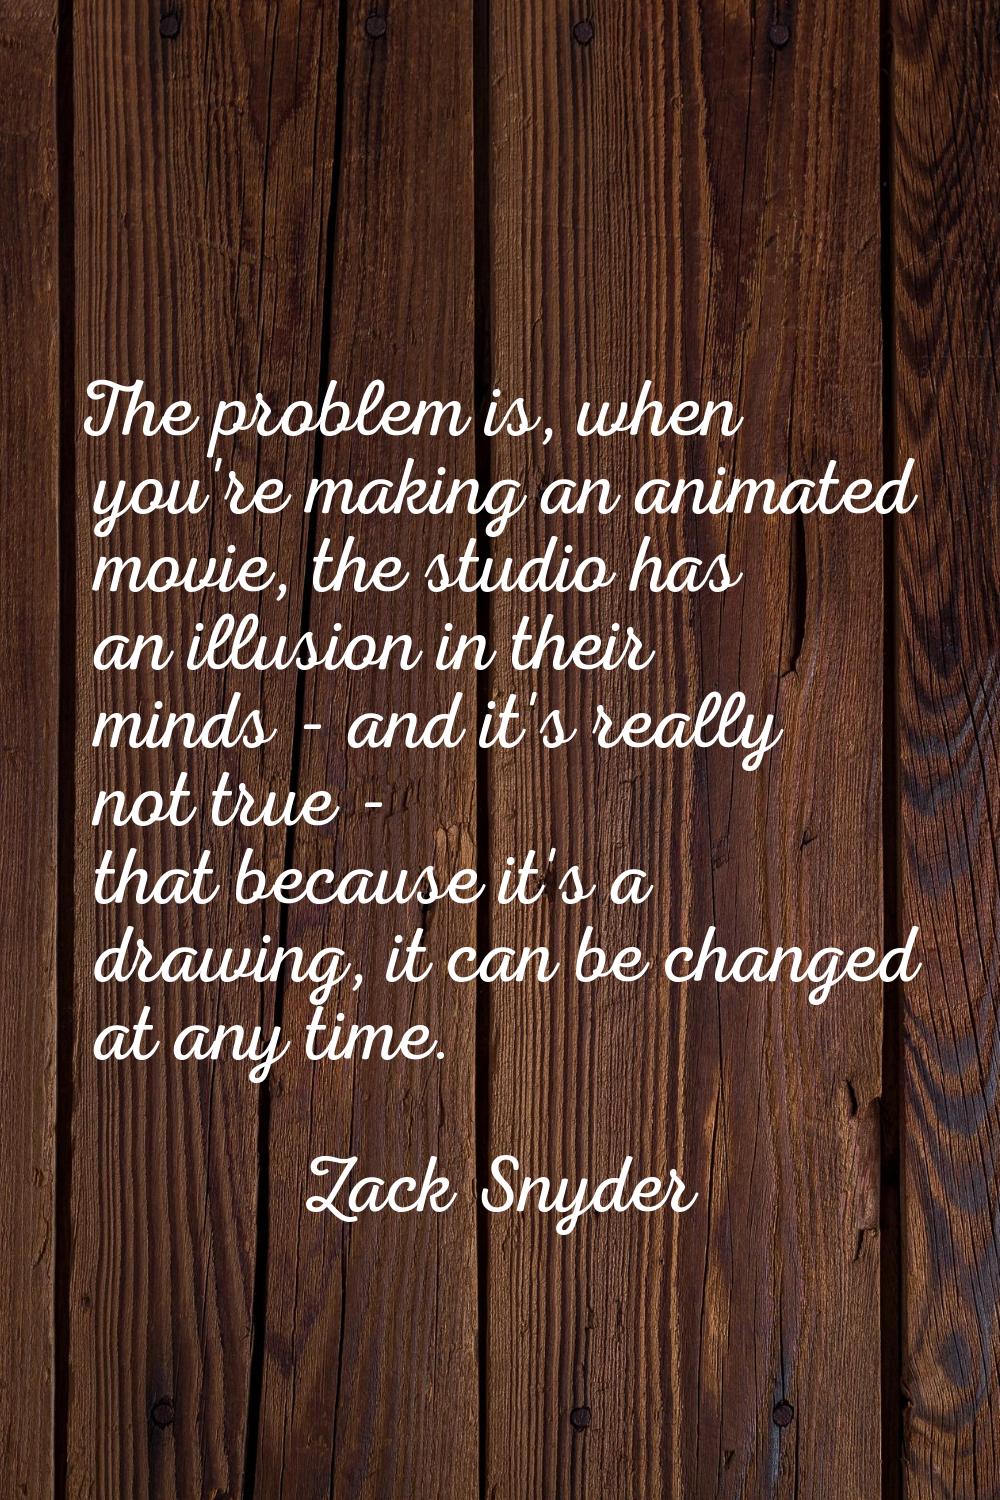 The problem is, when you're making an animated movie, the studio has an illusion in their minds - a